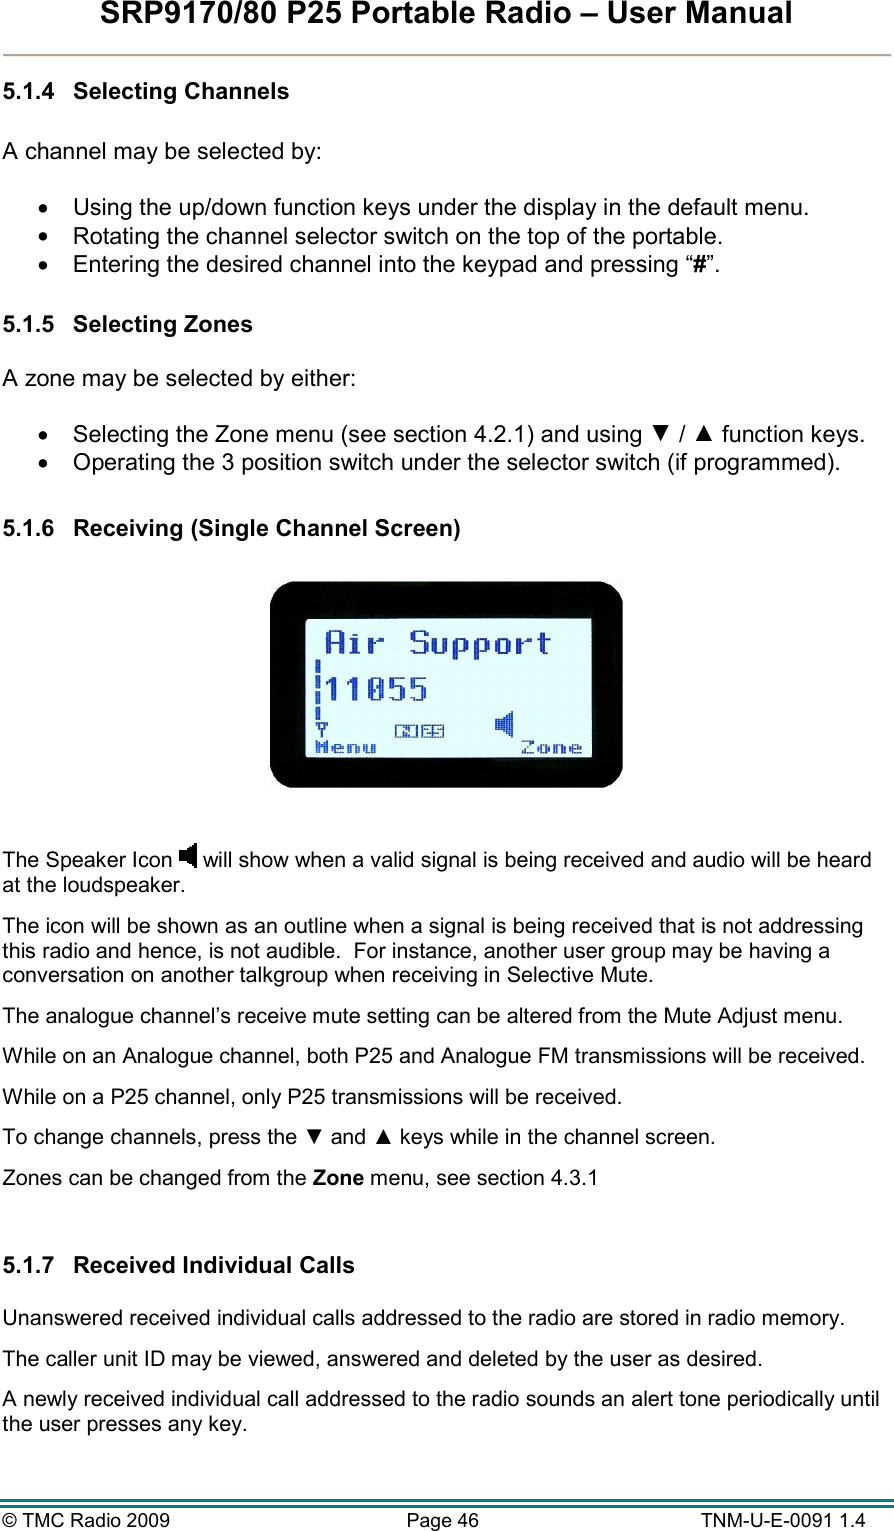 SRP9170/80 P25 Portable Radio – User Manual  © TMC Radio 2009  Page 46   TNM-U-E-0091 1.4 5.1.4  Selecting Channels  A channel may be selected by:  •  Using the up/down function keys under the display in the default menu. •  Rotating the channel selector switch on the top of the portable. •  Entering the desired channel into the keypad and pressing “#”.  5.1.5  Selecting Zones  A zone may be selected by either:  •  Selecting the Zone menu (see section 4.2.1) and using ▼ / ▲ function keys. •  Operating the 3 position switch under the selector switch (if programmed).  5.1.6  Receiving (Single Channel Screen)    The Speaker Icon   will show when a valid signal is being received and audio will be heard at the loudspeaker.   The icon will be shown as an outline when a signal is being received that is not addressing this radio and hence, is not audible.  For instance, another user group may be having a conversation on another talkgroup when receiving in Selective Mute. The analogue channel’s receive mute setting can be altered from the Mute Adjust menu. While on an Analogue channel, both P25 and Analogue FM transmissions will be received. While on a P25 channel, only P25 transmissions will be received. To change channels, press the ▼ and ▲ keys while in the channel screen. Zones can be changed from the Zone menu, see section 4.3.1  5.1.7  Received Individual Calls   Unanswered received individual calls addressed to the radio are stored in radio memory.   The caller unit ID may be viewed, answered and deleted by the user as desired.   A newly received individual call addressed to the radio sounds an alert tone periodically until the user presses any key.  